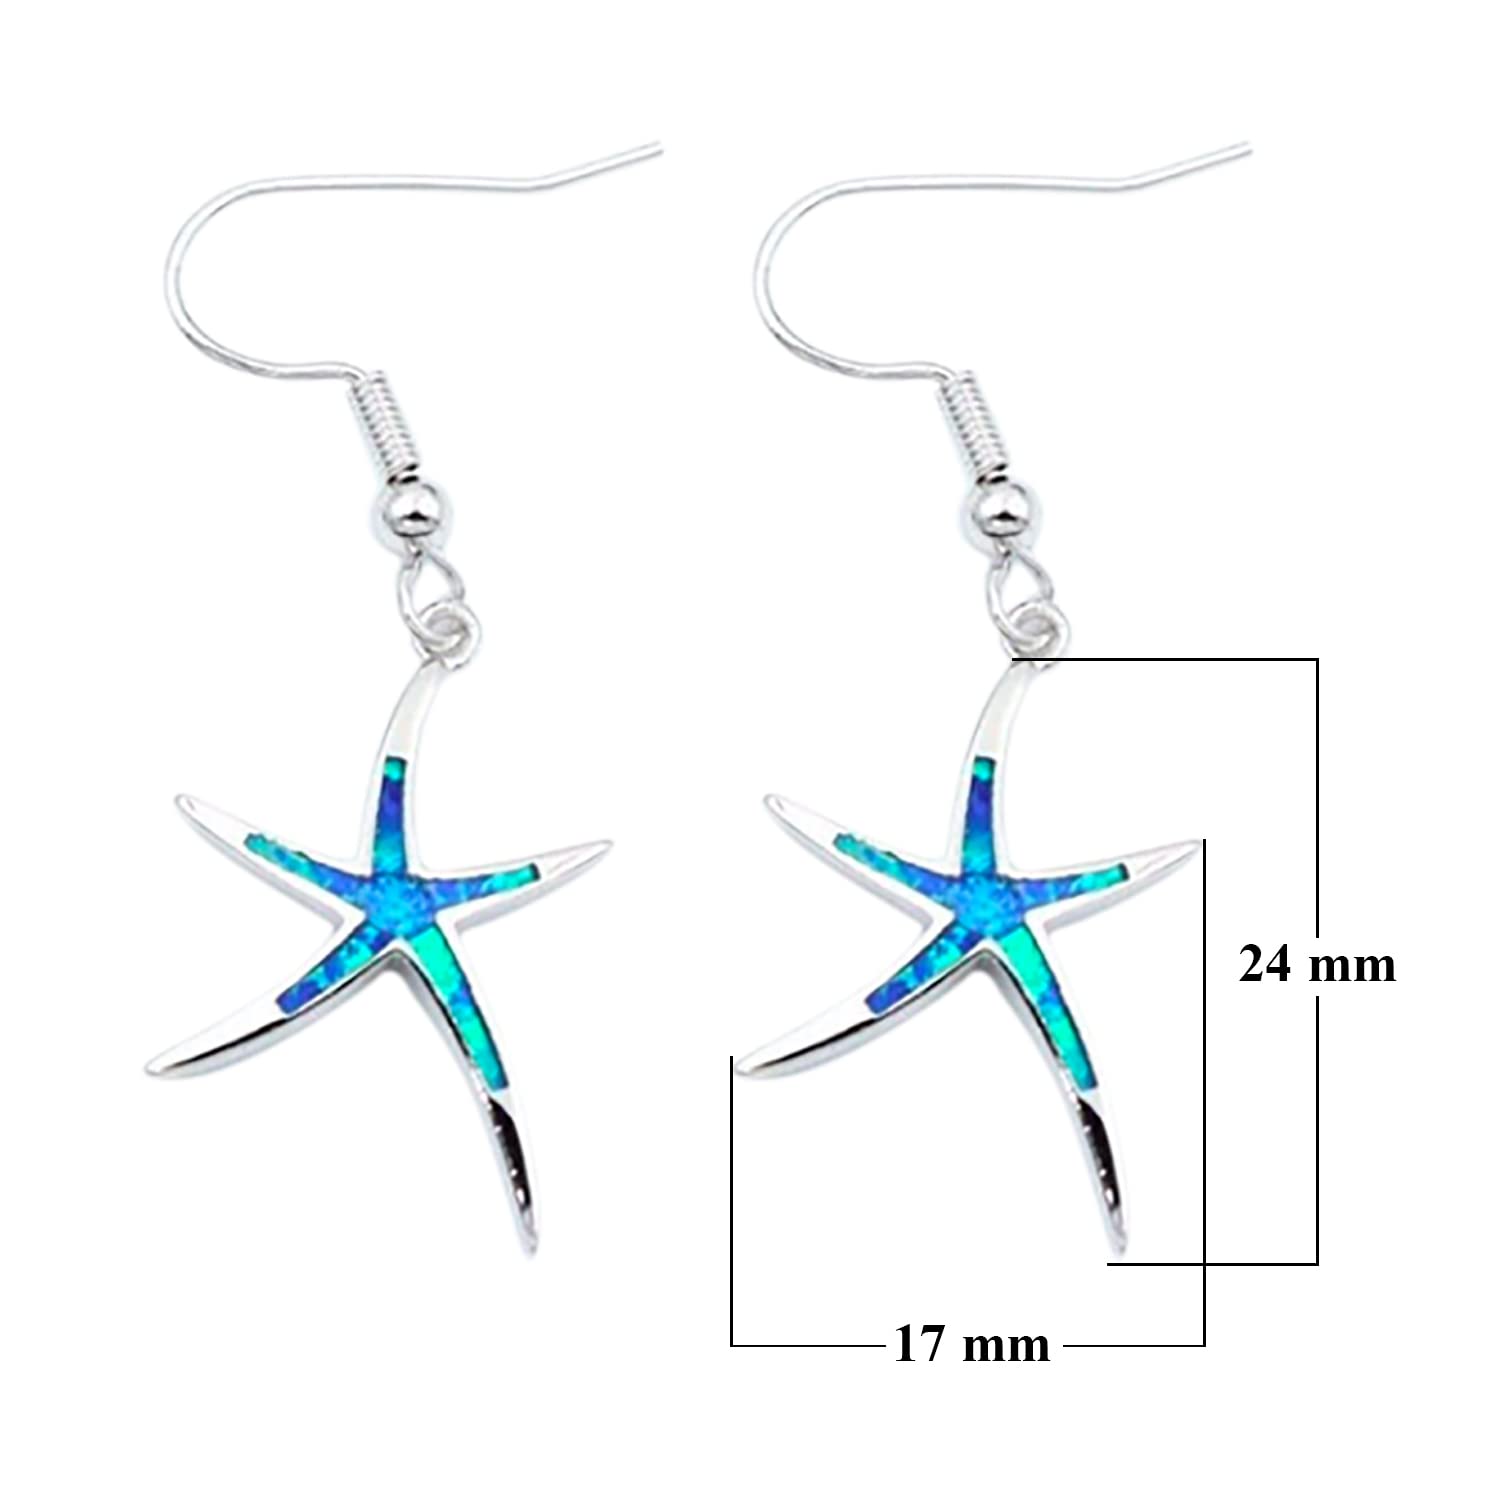 Starfish Jewellery gift set for women. Starfish design pendant necklace with enamel inlay &amp; matching earrings. With Gift Box-